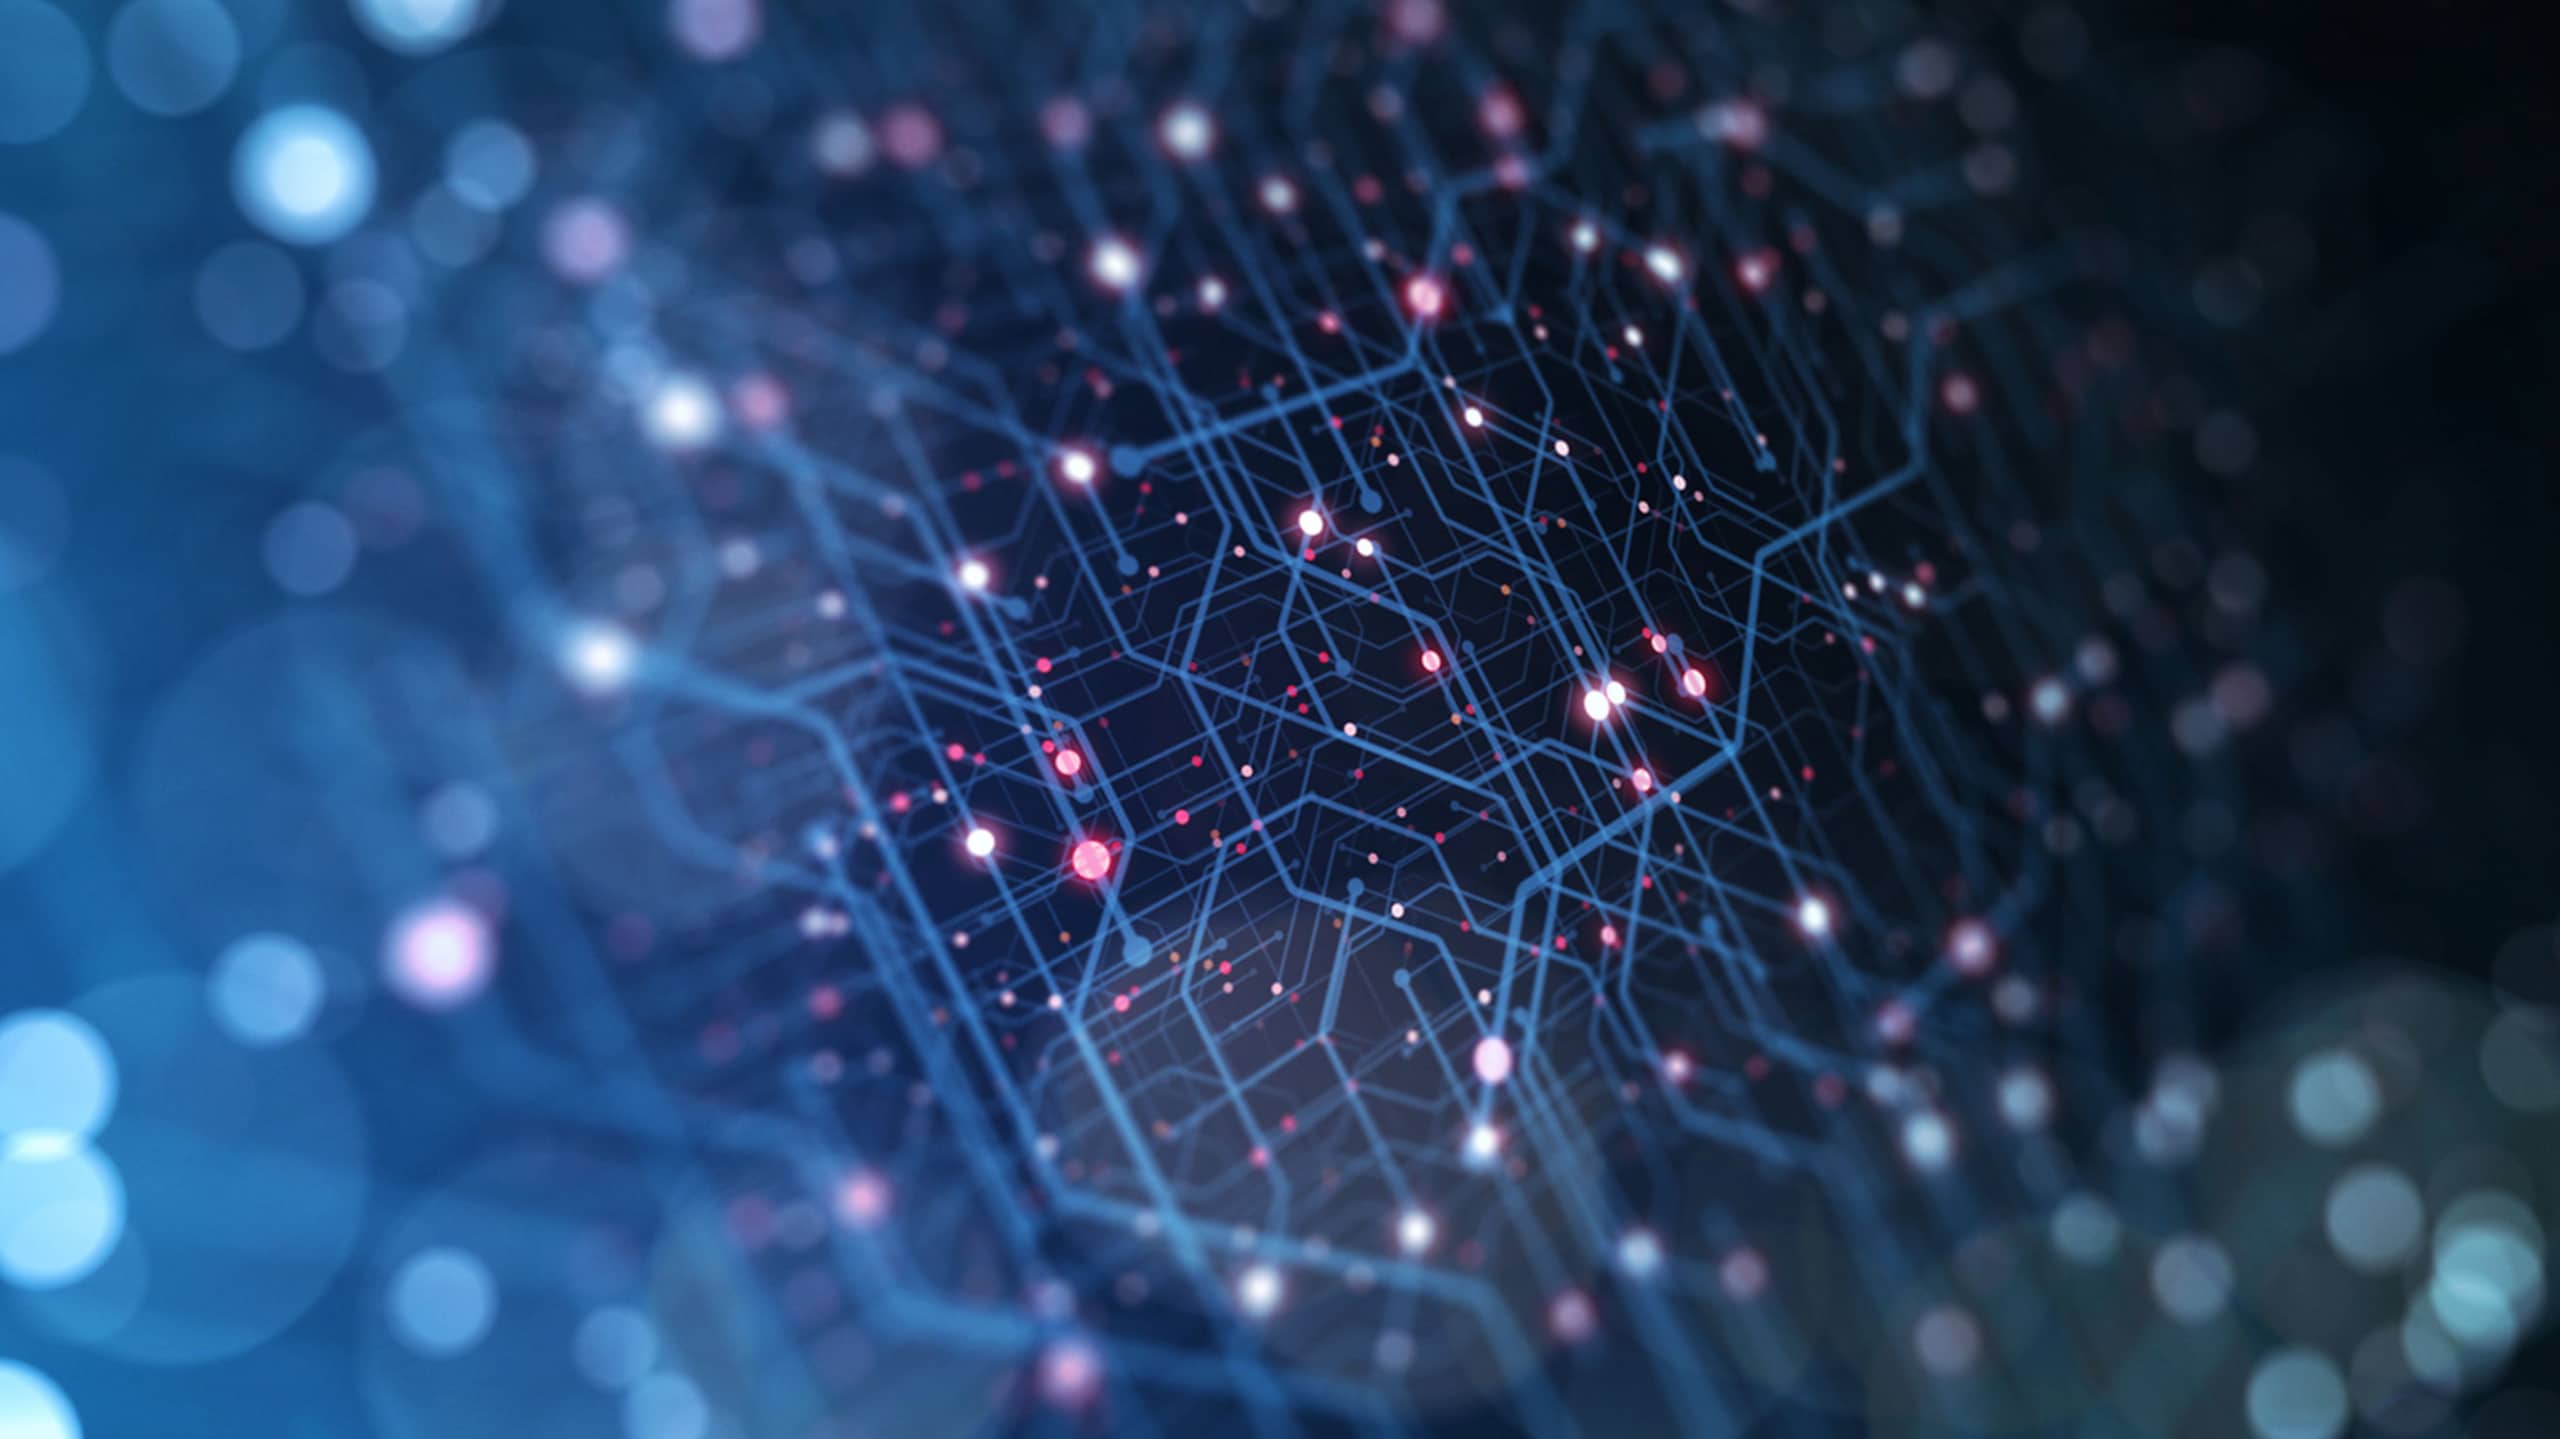 Abstract network background image featuring interconnected lines and nodes with glowing points, set against a dark blue backdrop with bokeh effects.